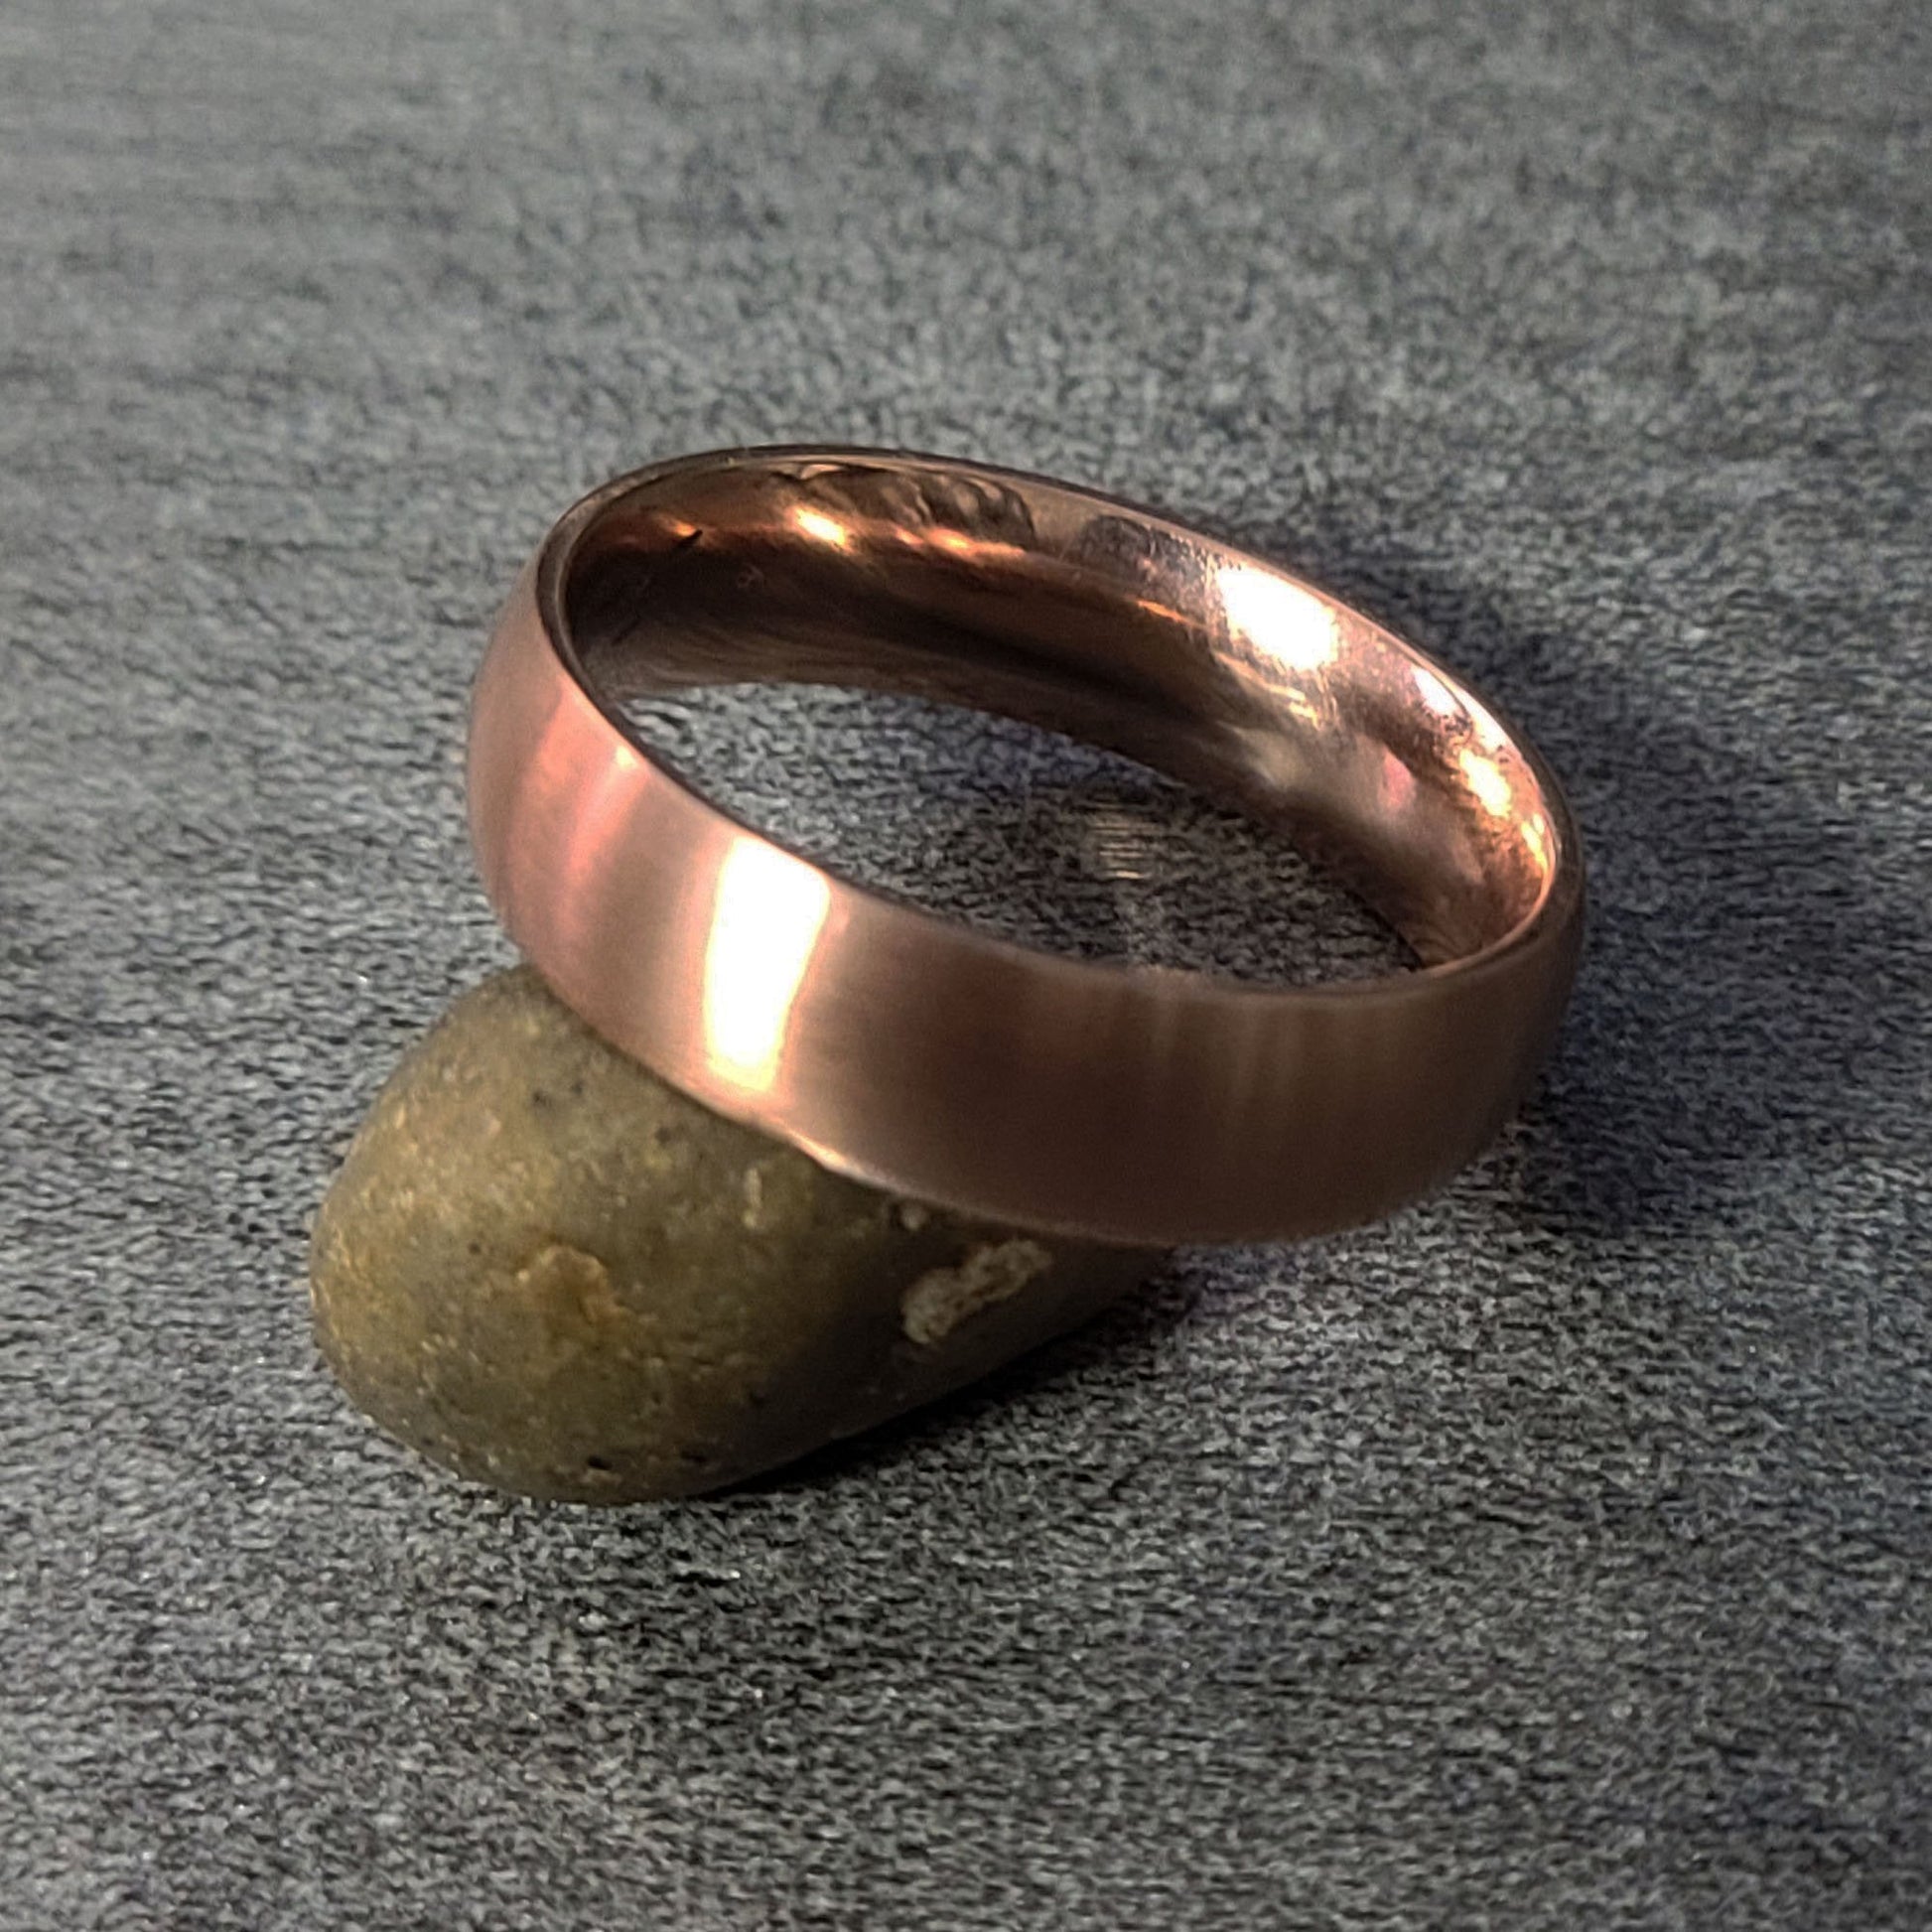 ThinkEngraved wedding Band Personalized Men's Wedding Band - Matte Rose Gold Coated Stainless Steel